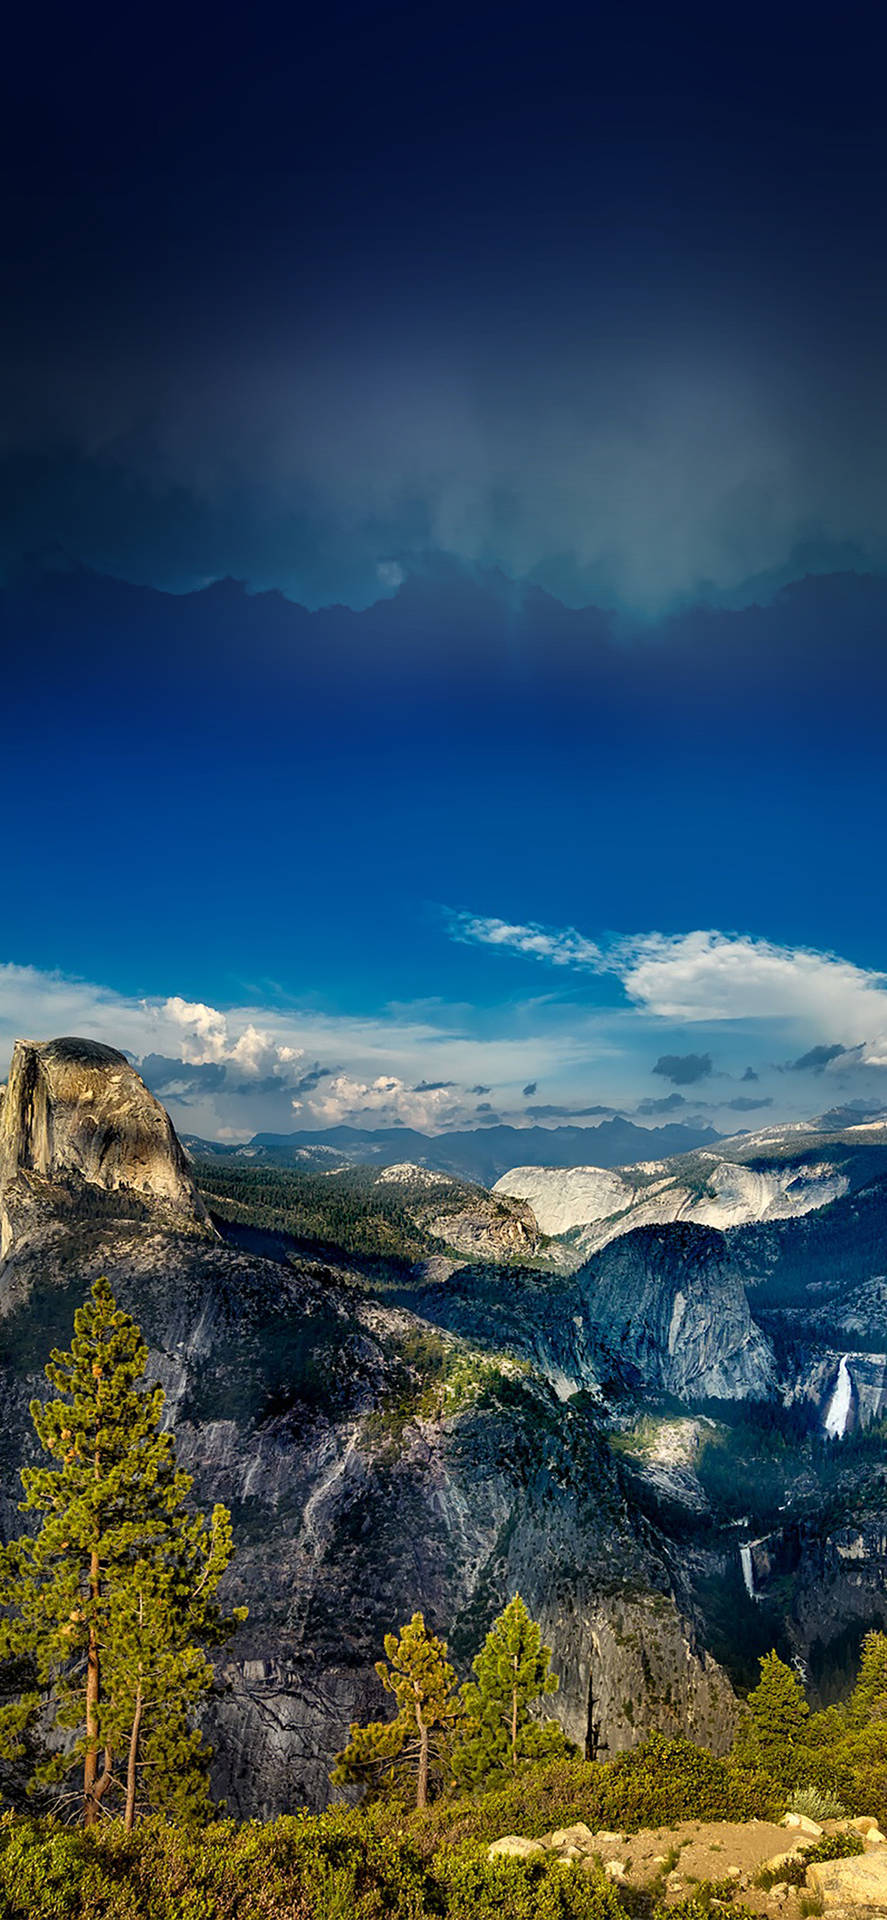 Enjoy the beautiful Yosemite National Park from your iPhone Wallpaper